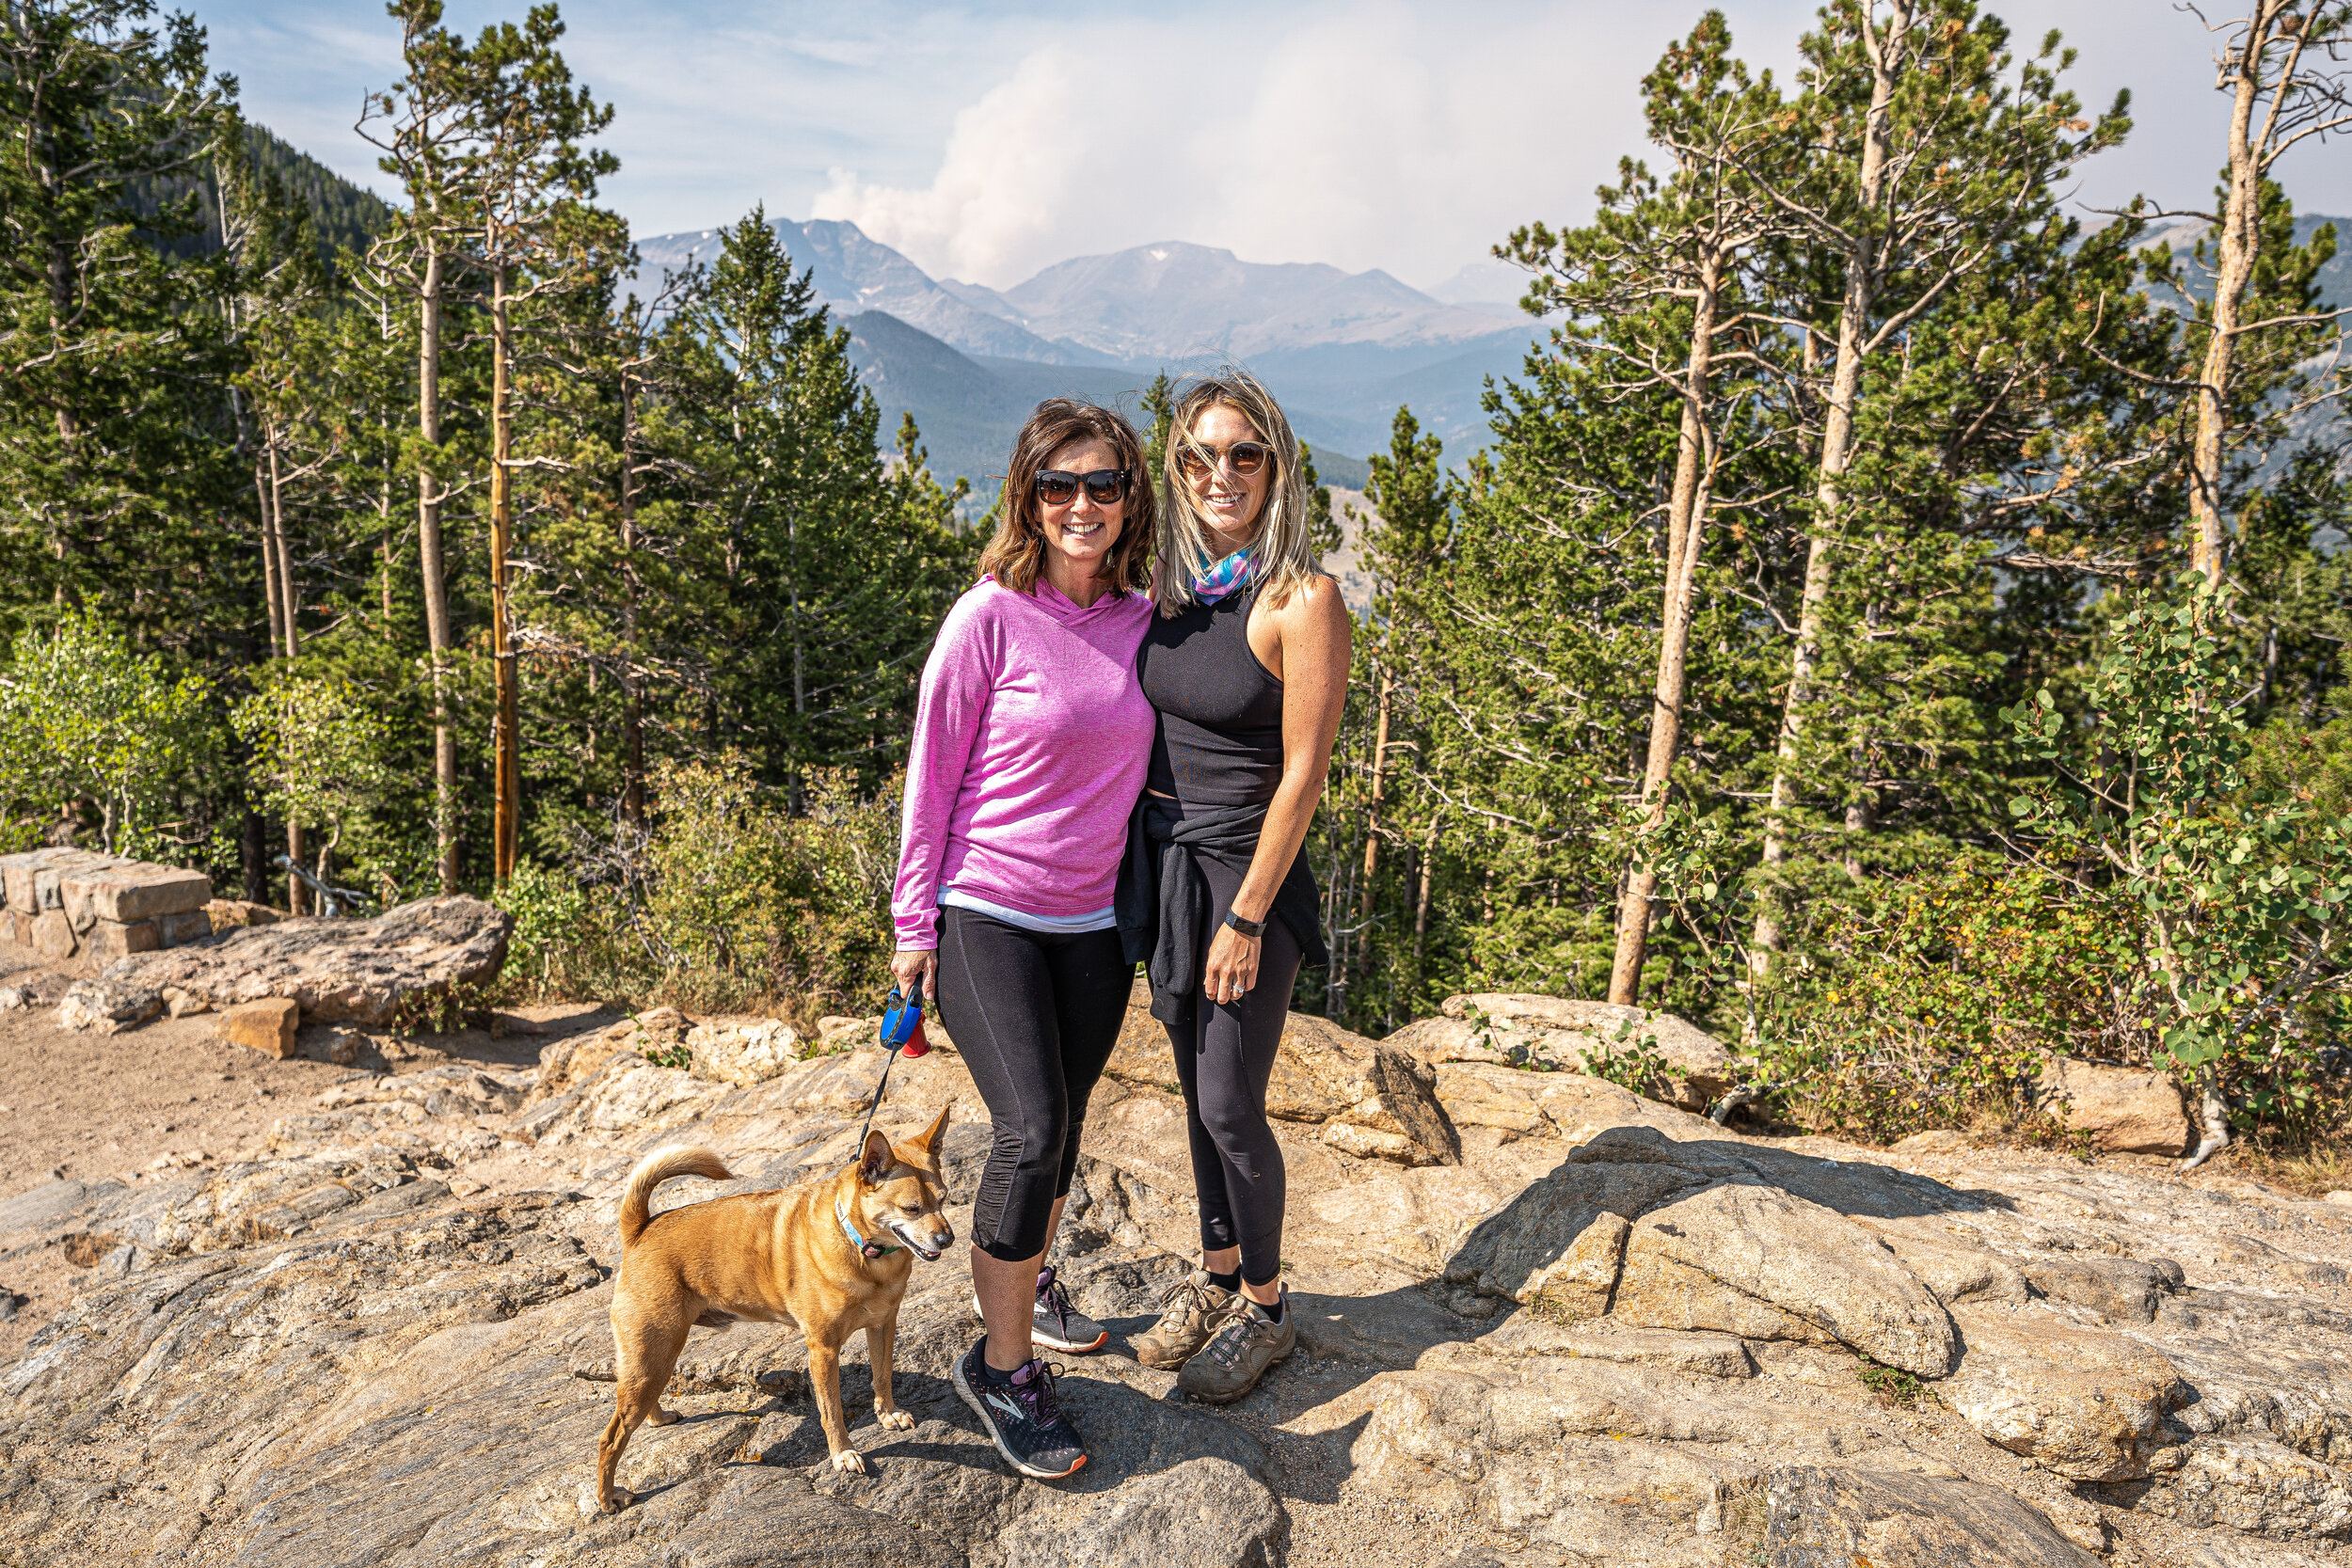  After getting settled into Estes Park, Rachel, our daughter-in-law, came to visit us for Labor Day weekend. What a treat! In this photo, you can see the  Cameron Peak Fire  smoke in the background.  